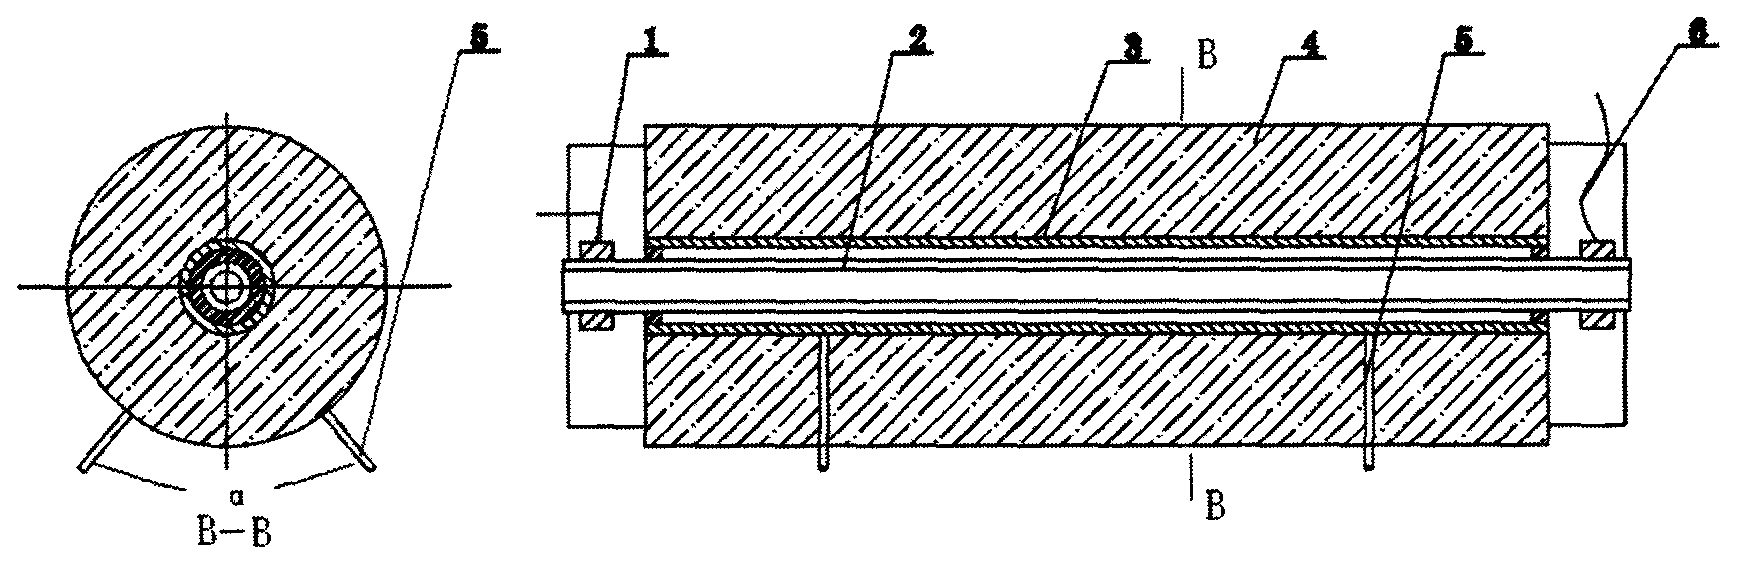 Continuous graphitizing ultra-high temperature tube furnace